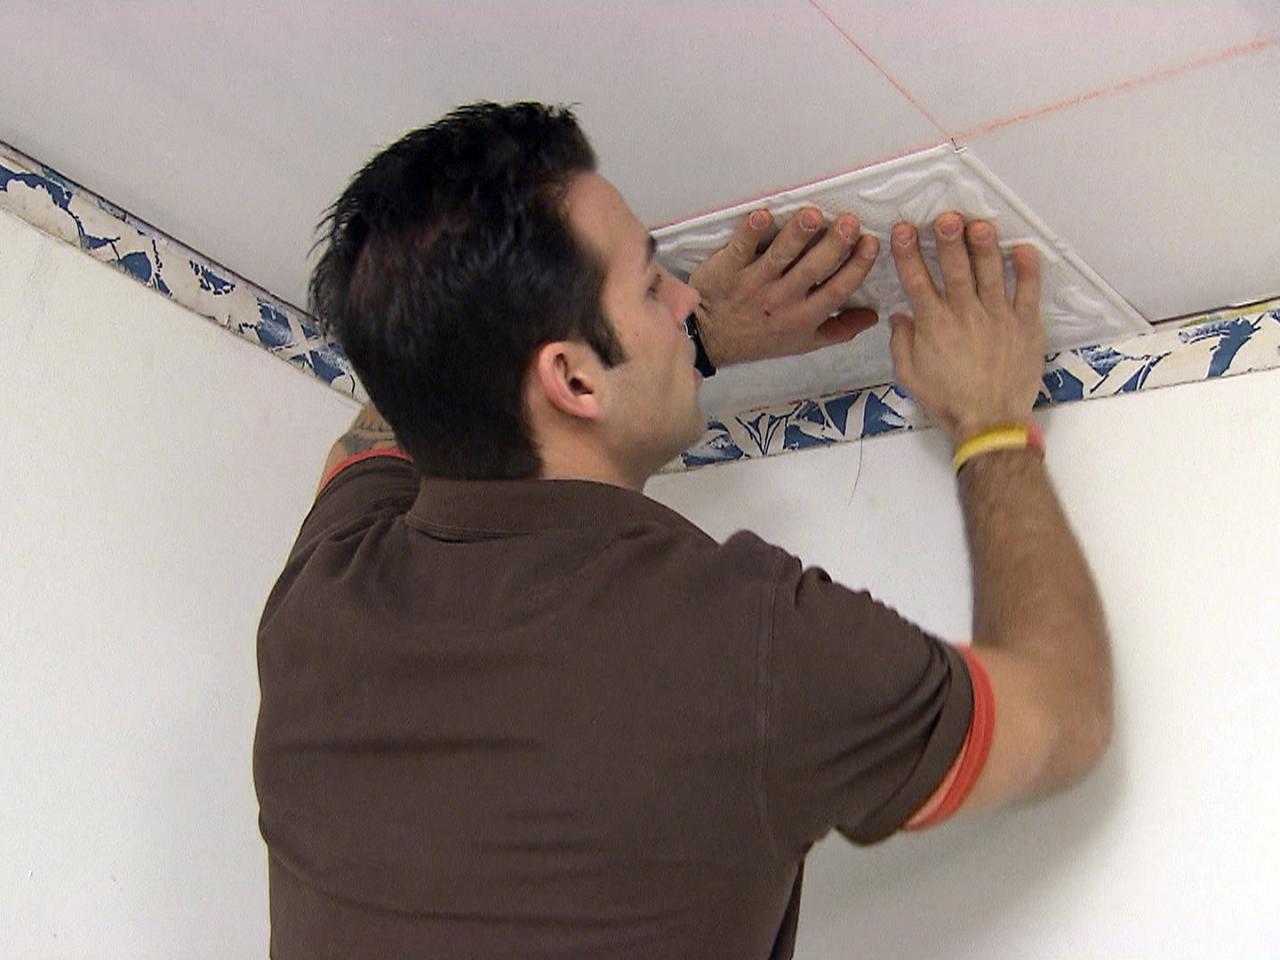 How To Install A Tin Tile Ceiling, How To Install Tin Ceiling Tiles Over Drywall